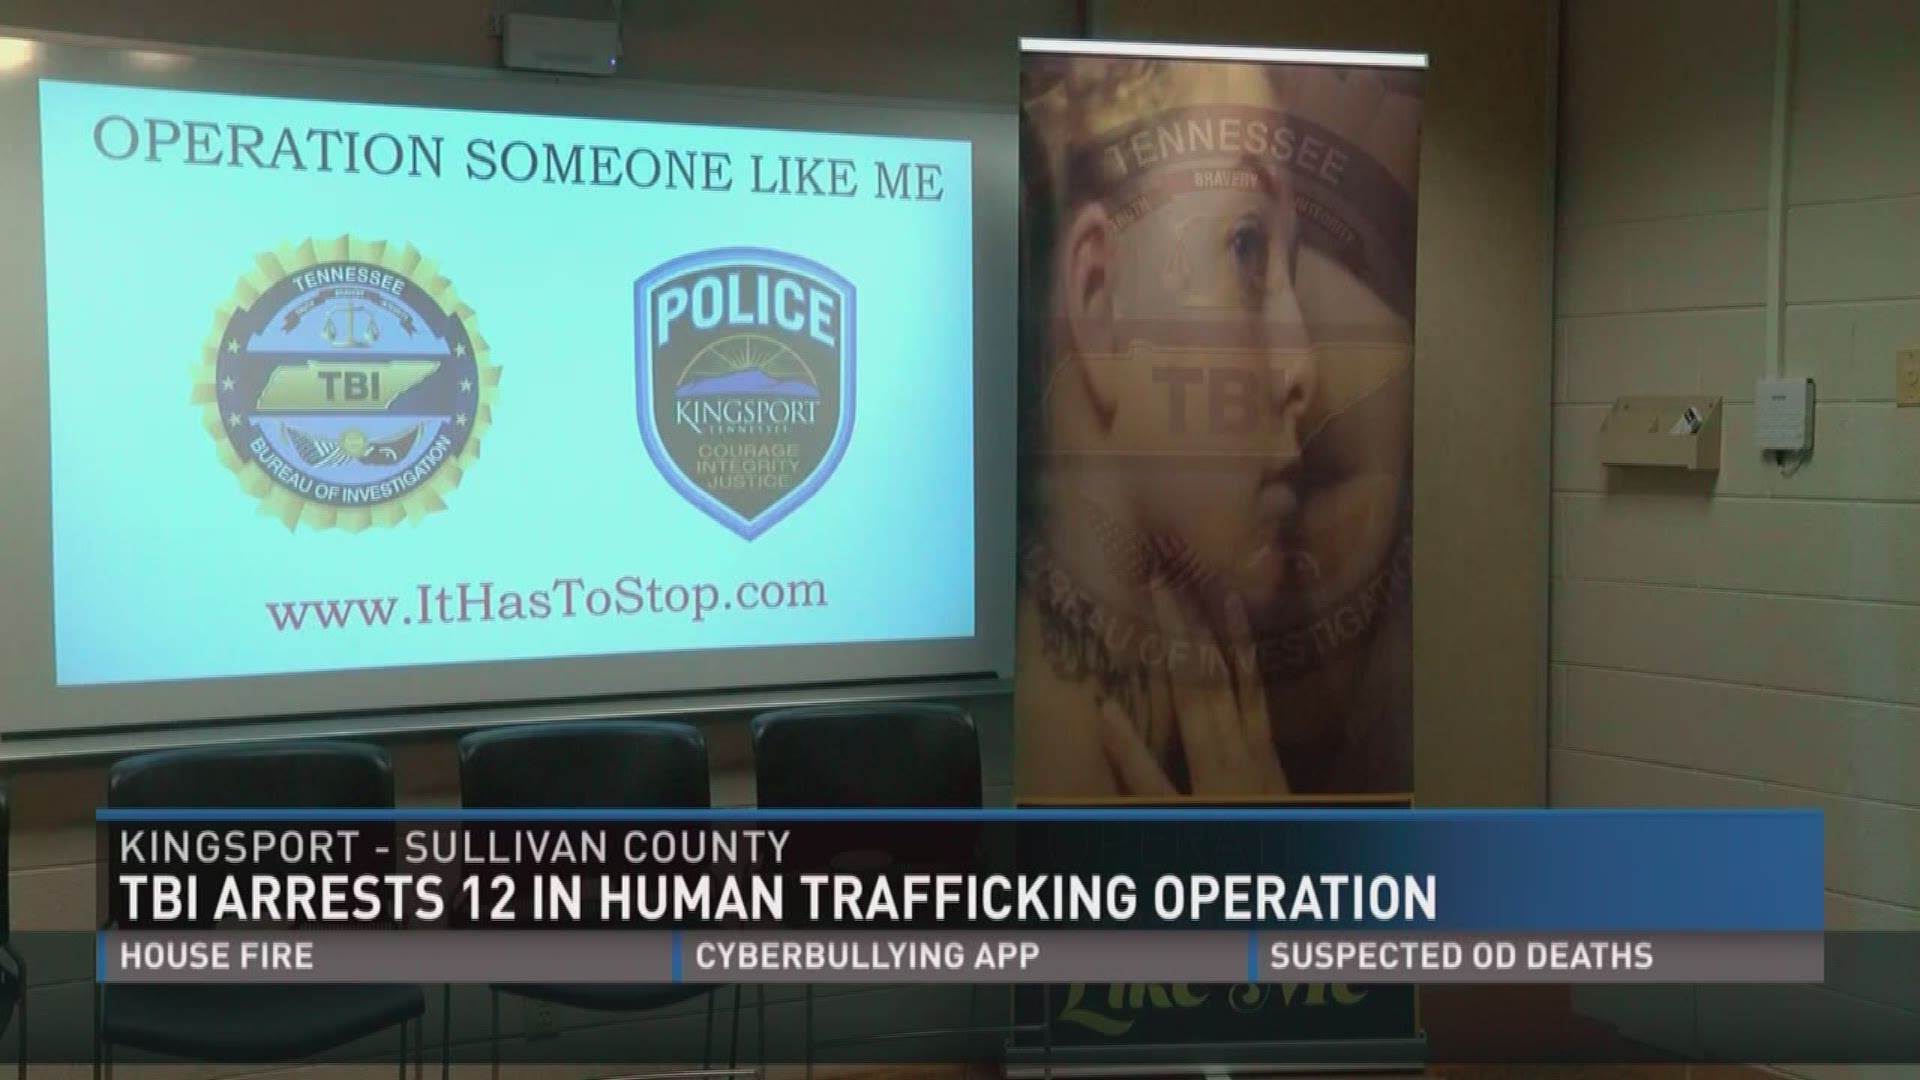 Aug. 15, 2017: A dozen people face felony charges following a 4-day investigation into human trafficking.